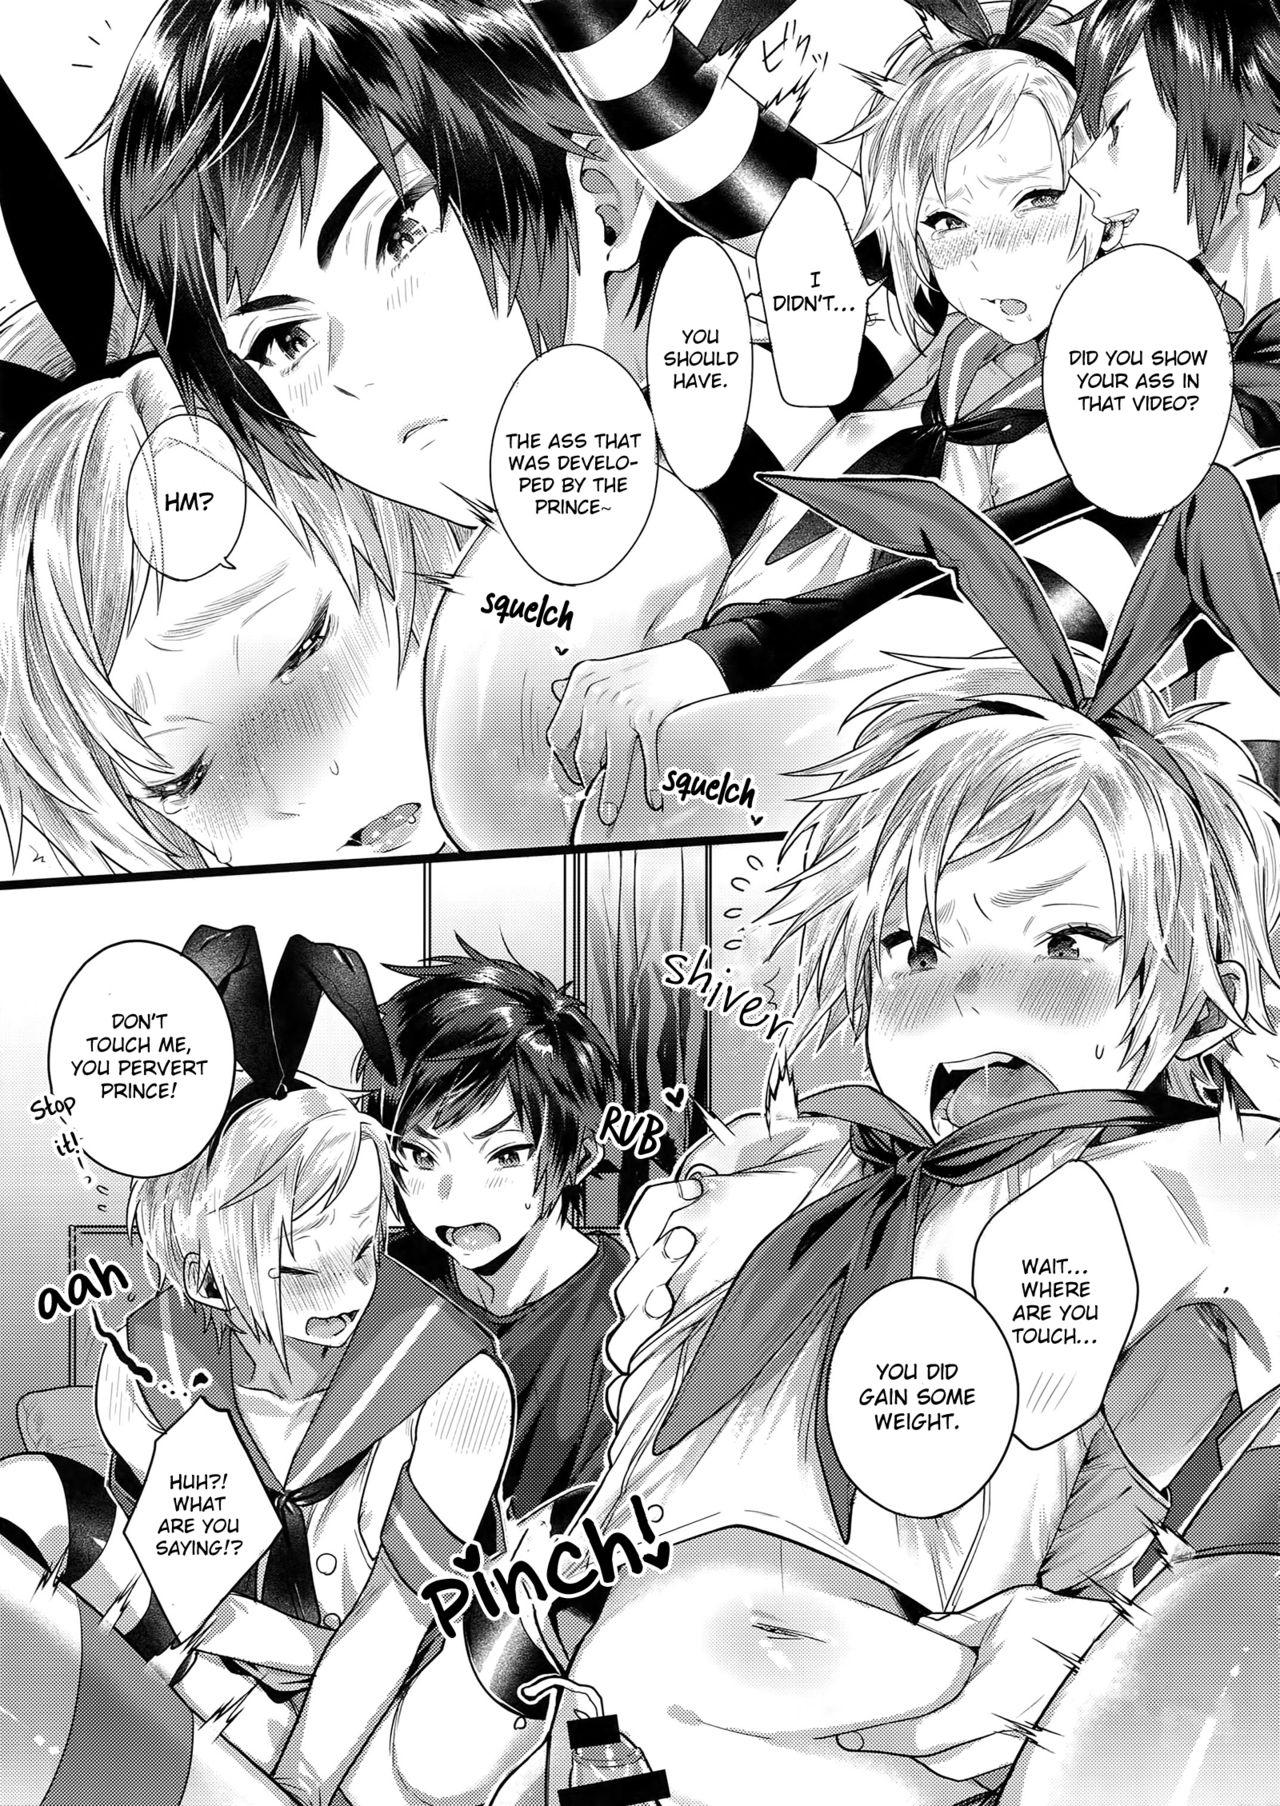 Gay Black Taikei Iji no Shudan | Prompto Argentum-kun's Means For Maintaining His Body Shape! - Kantai collection Final fantasy xv Porn Star - Page 8